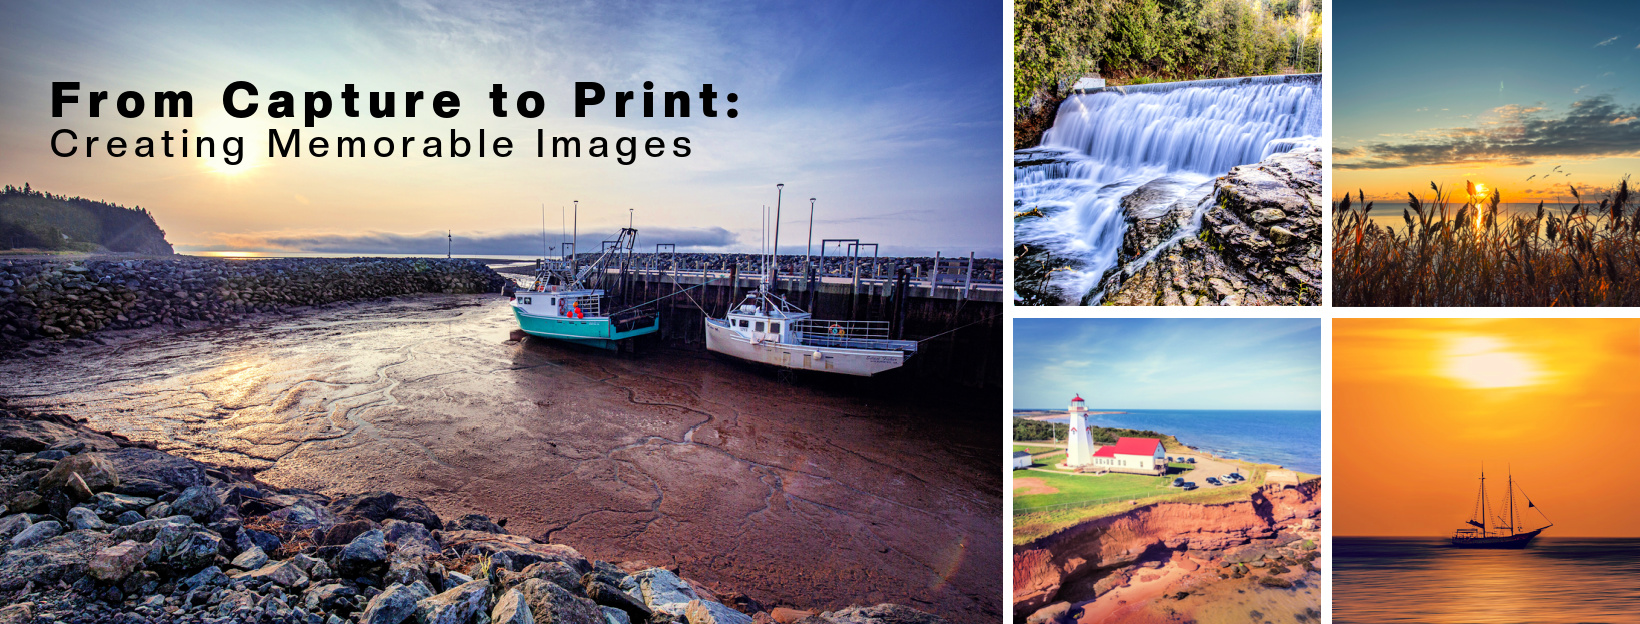 From Capture to Print: Creating Memorable Images, By: Peter Dulis